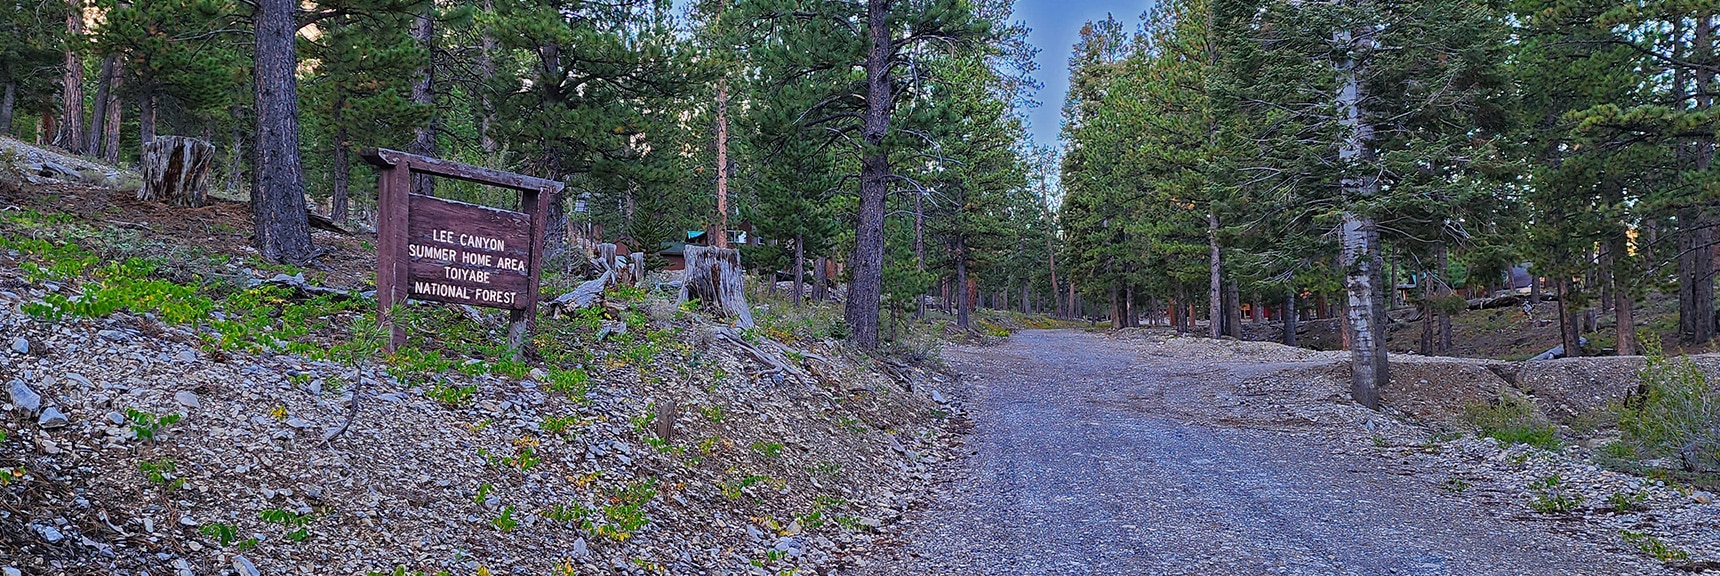 Take the First U-Turn to the Left off Avalanche Trail Road | Mummy Mountain Head from Lee Canyon Road | Mt Charleston Wilderness | Spring Mountains, Nevada